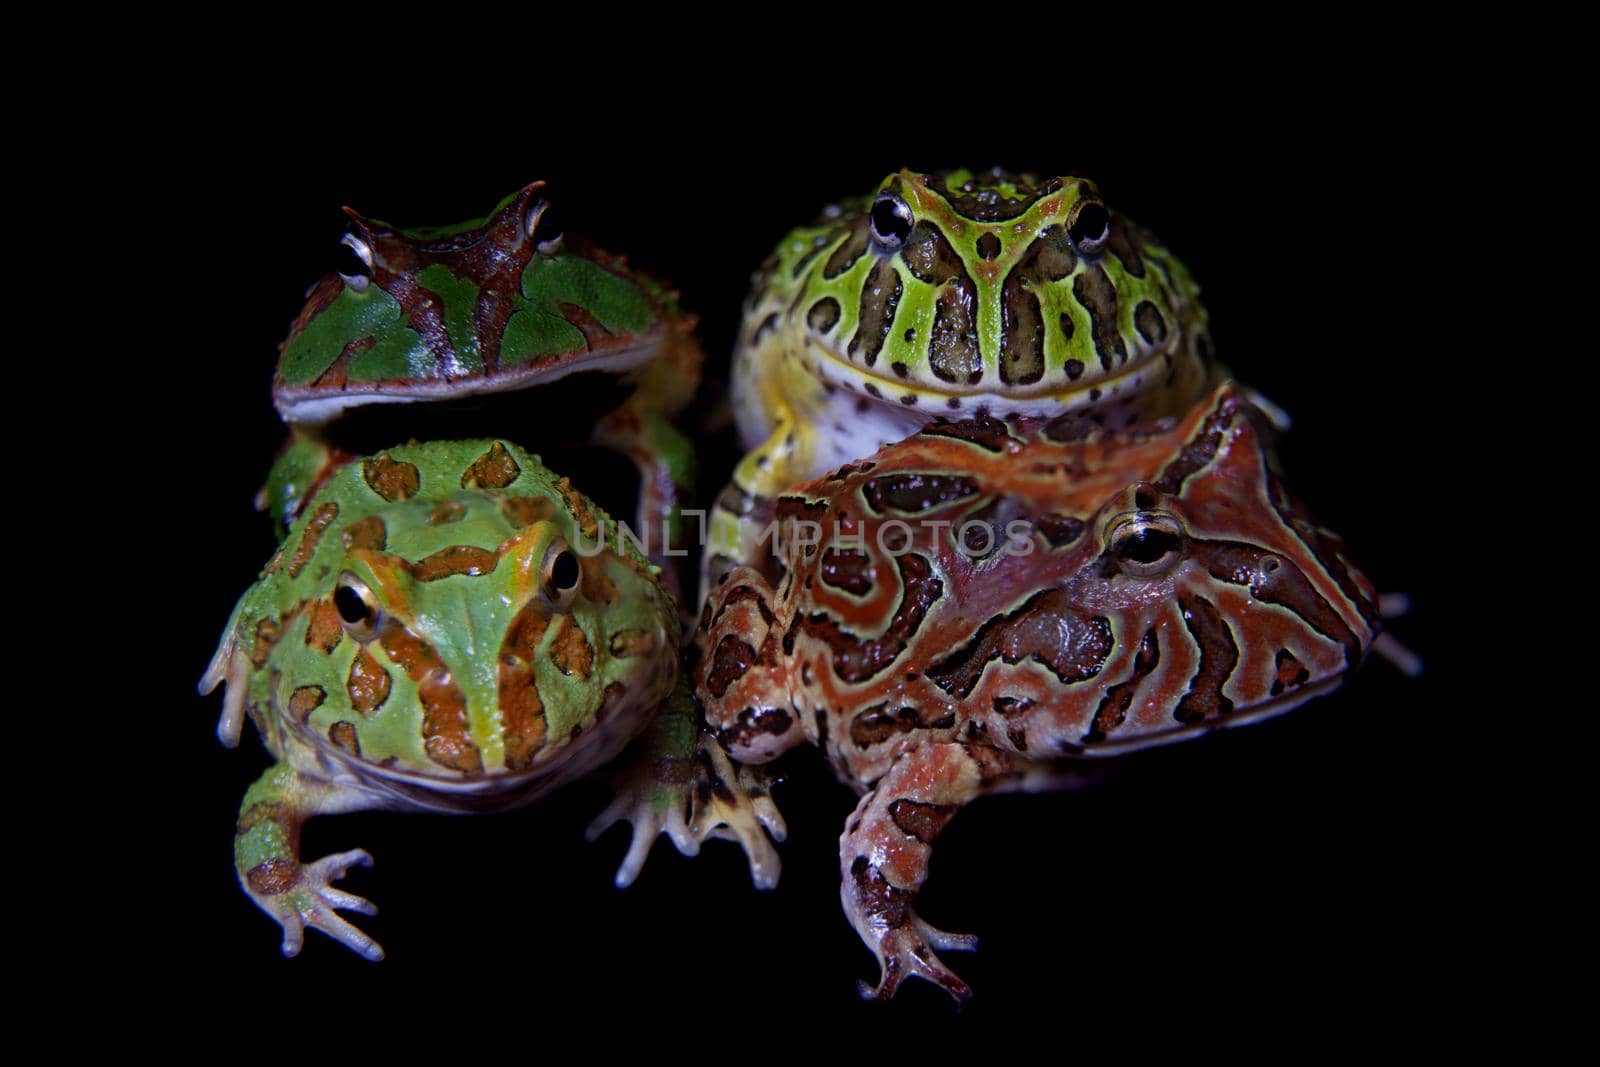 The pacman frogs, Ceratophrys genus, isolated on black background